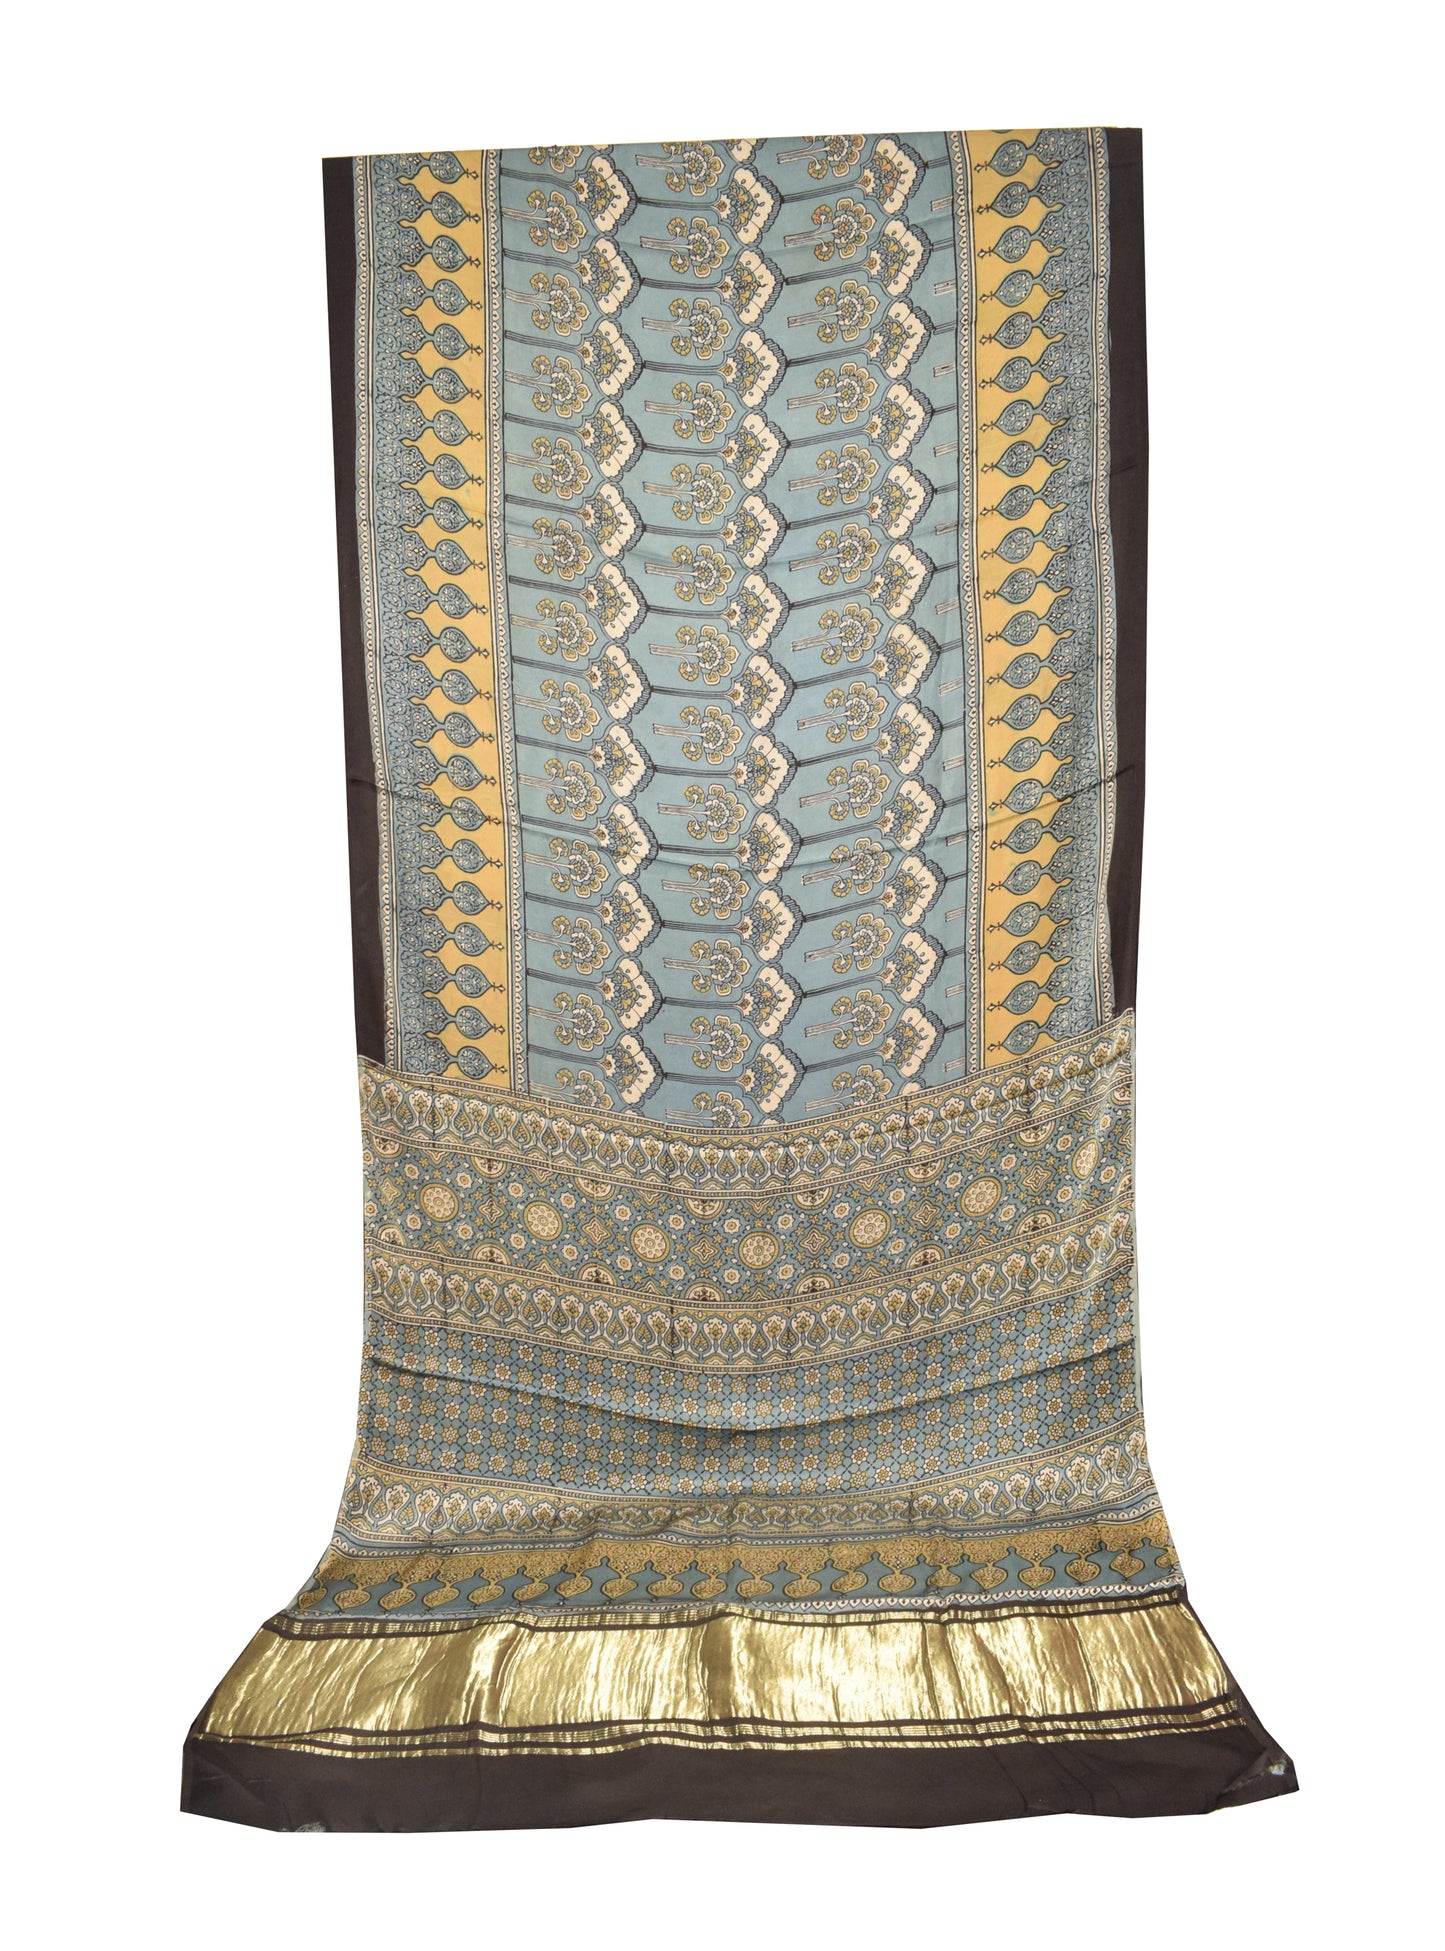 Ajrakh Modal Silk Natural Dye Hand Block Print Saree   With Golden Border  - With Blouse Piece - 6 mtrs Length    -  SKU : ID1510AE